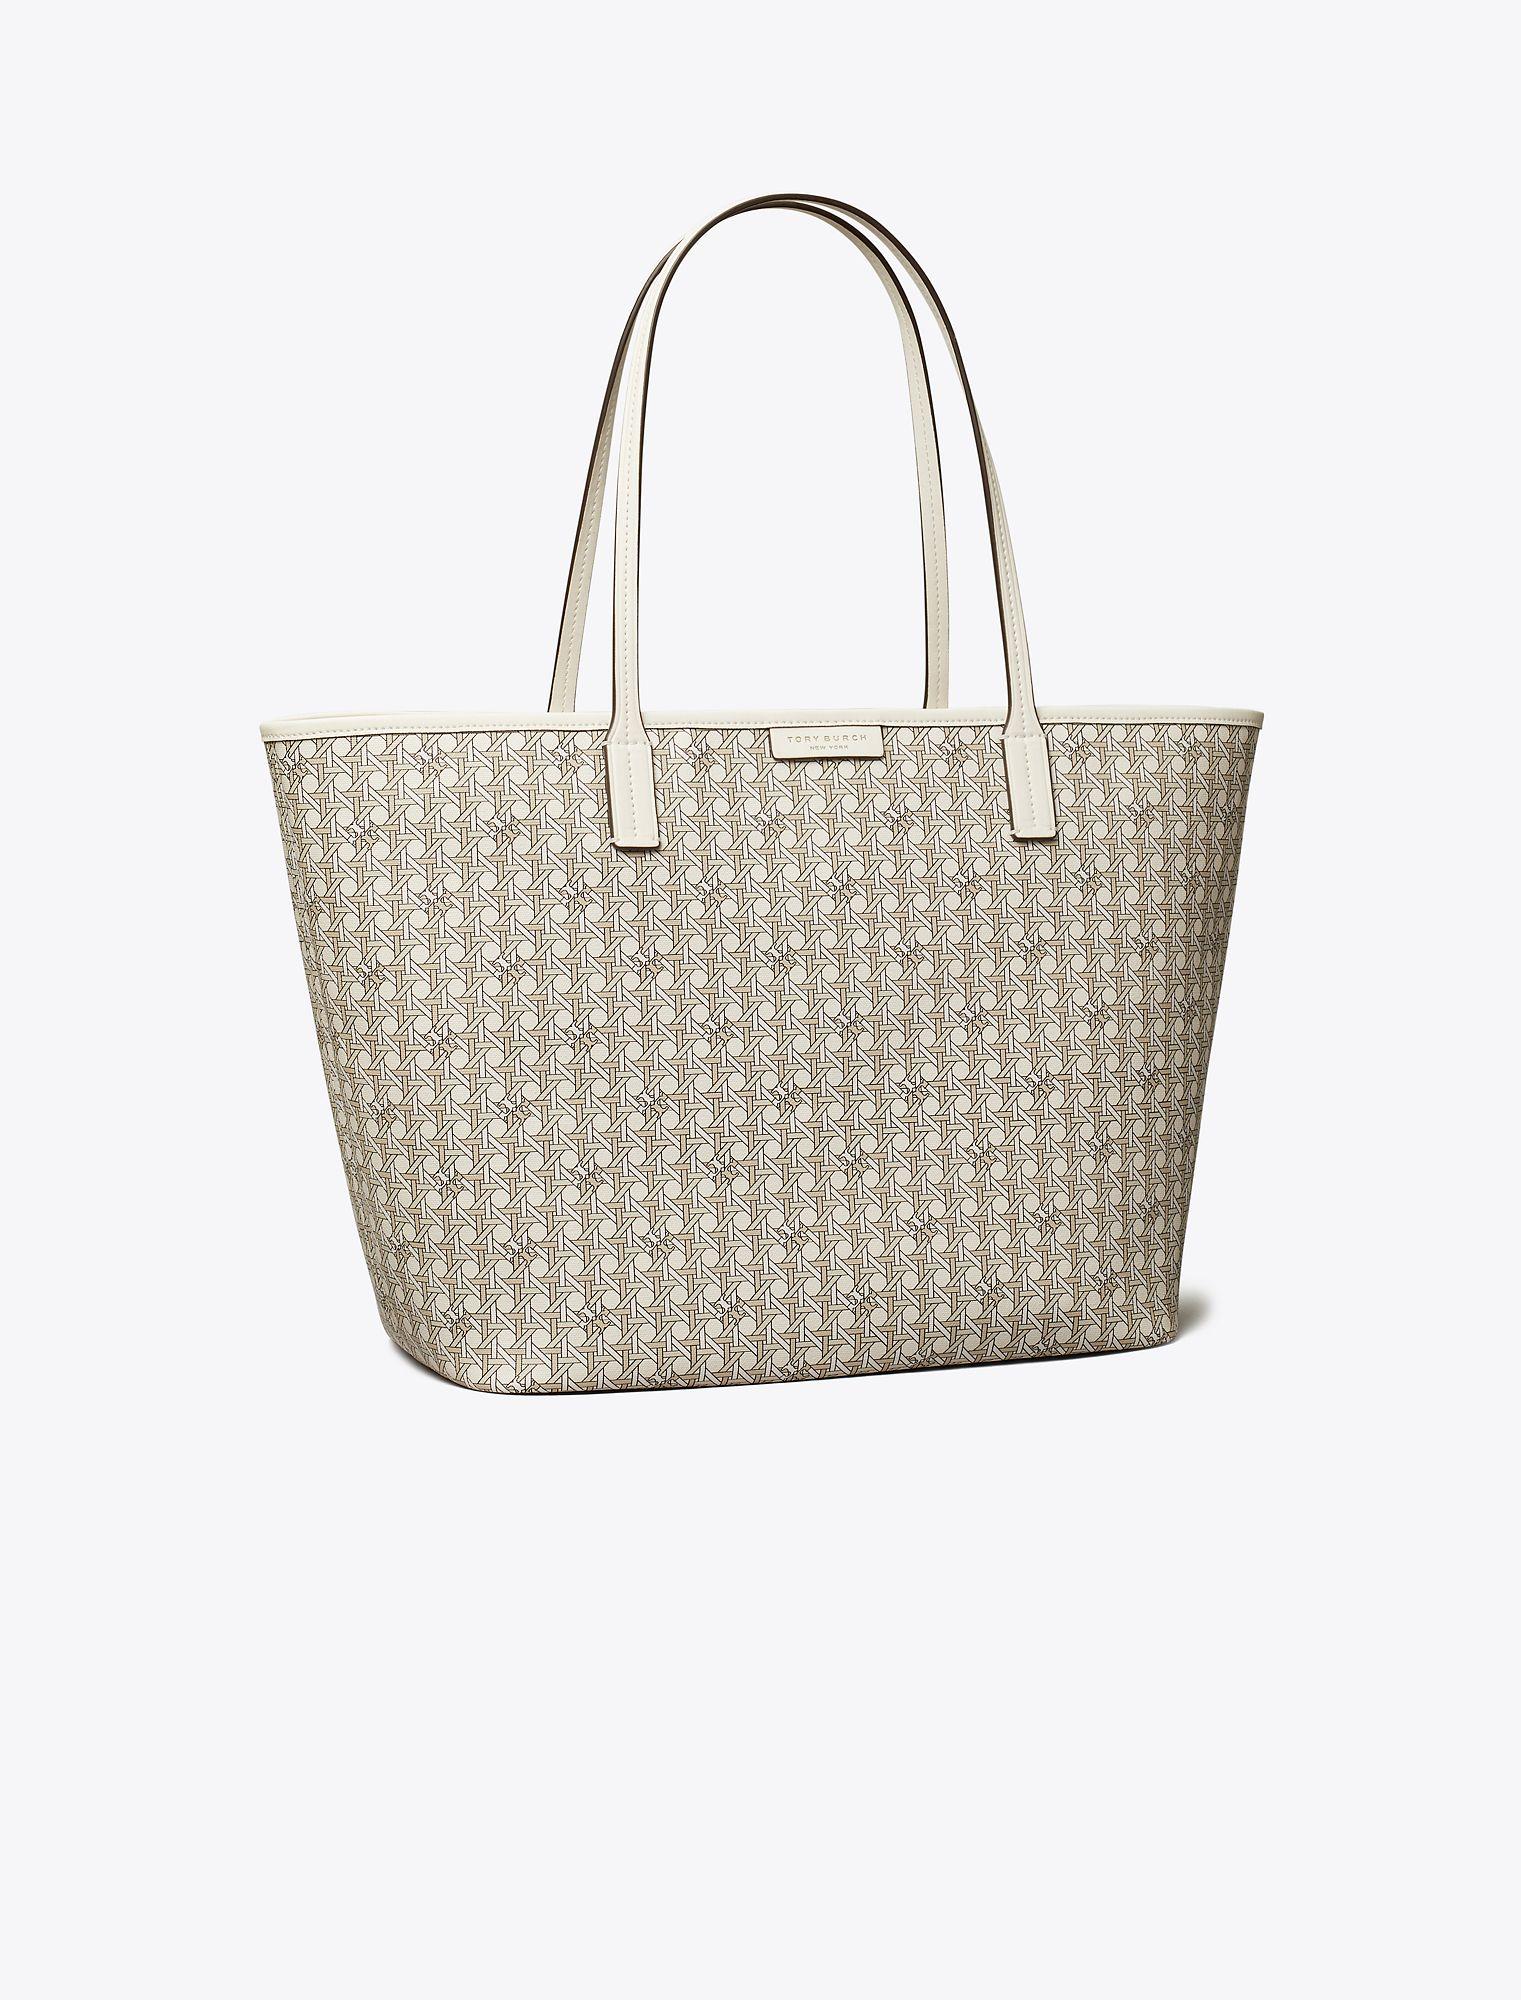 Tory Burch Ever-ready Open Tote in White | Lyst